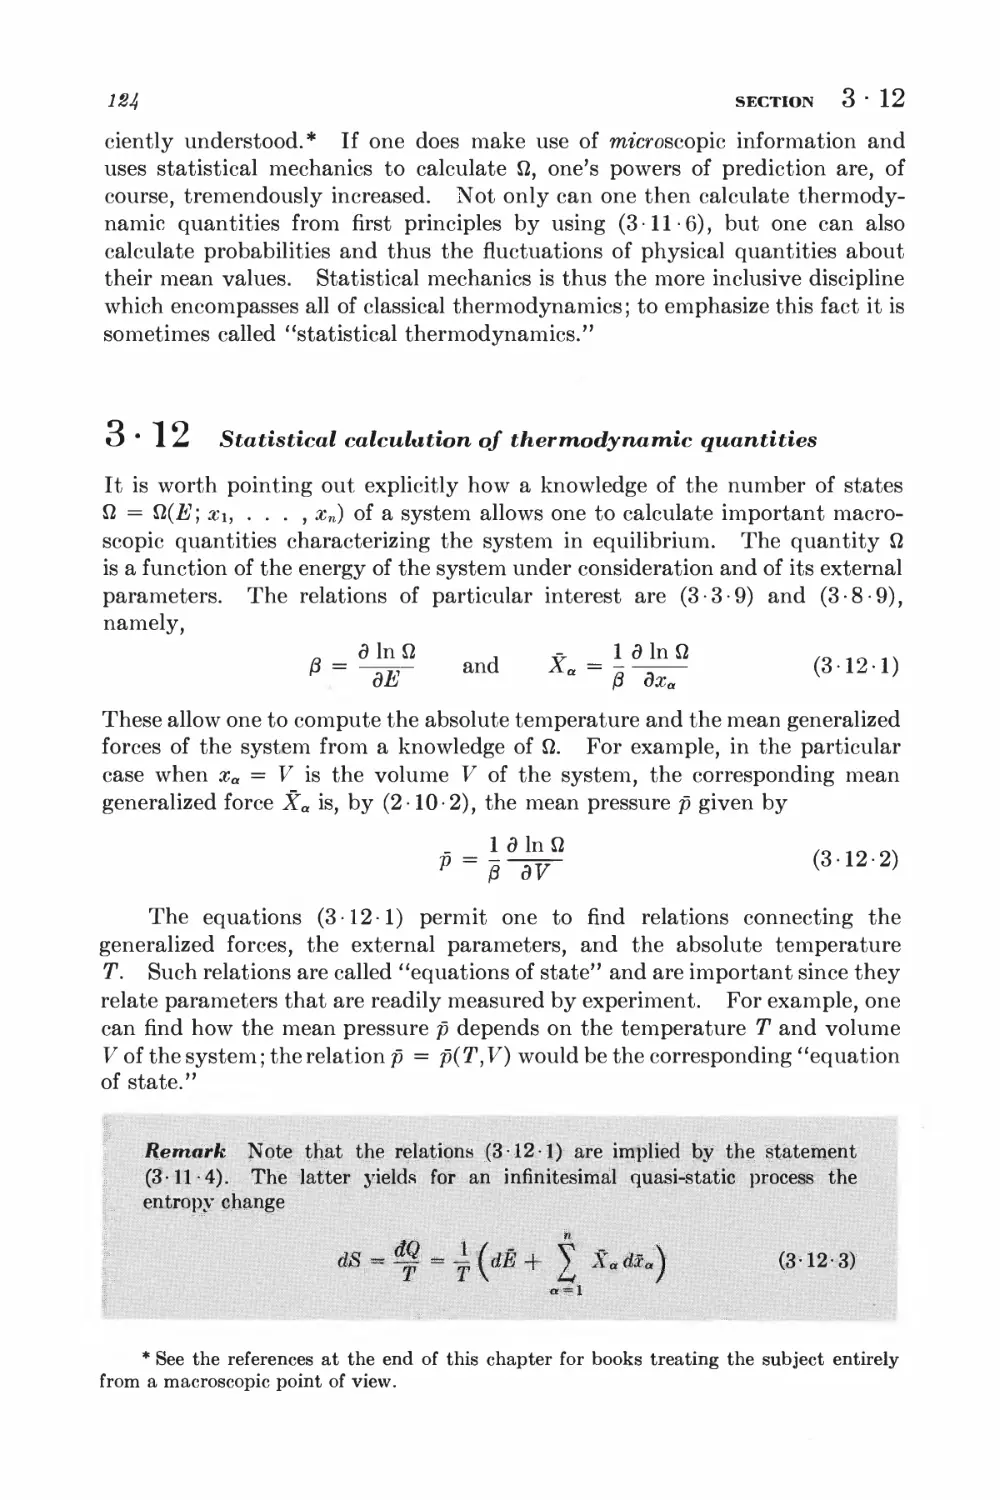 3.12 Statistical calculation of thermodynamic quantities